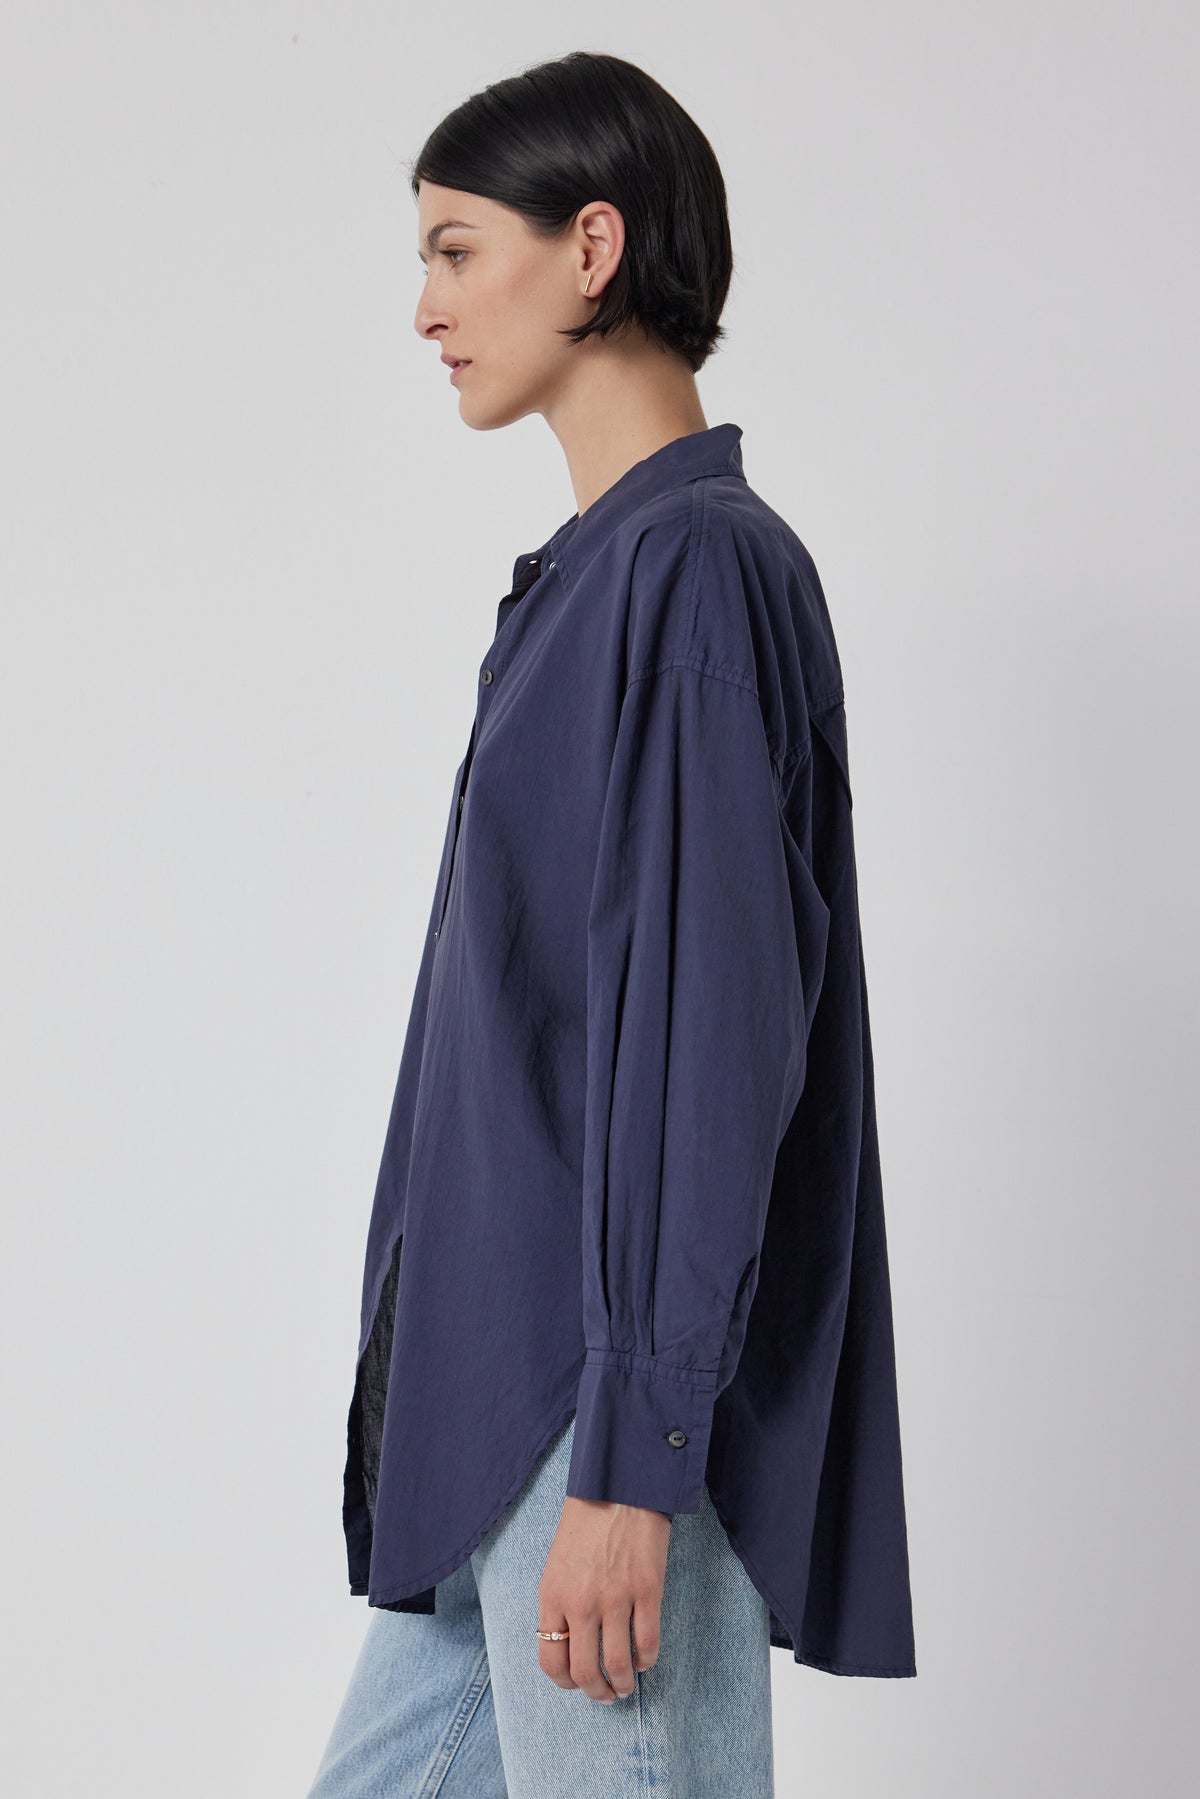 A side profile of a person wearing an oversized navy blue REDONDO button-up shirt made from soft cotton shirting and light blue relaxed trousers against a neutral background by Velvet by Jenny Graham.-36168814657729